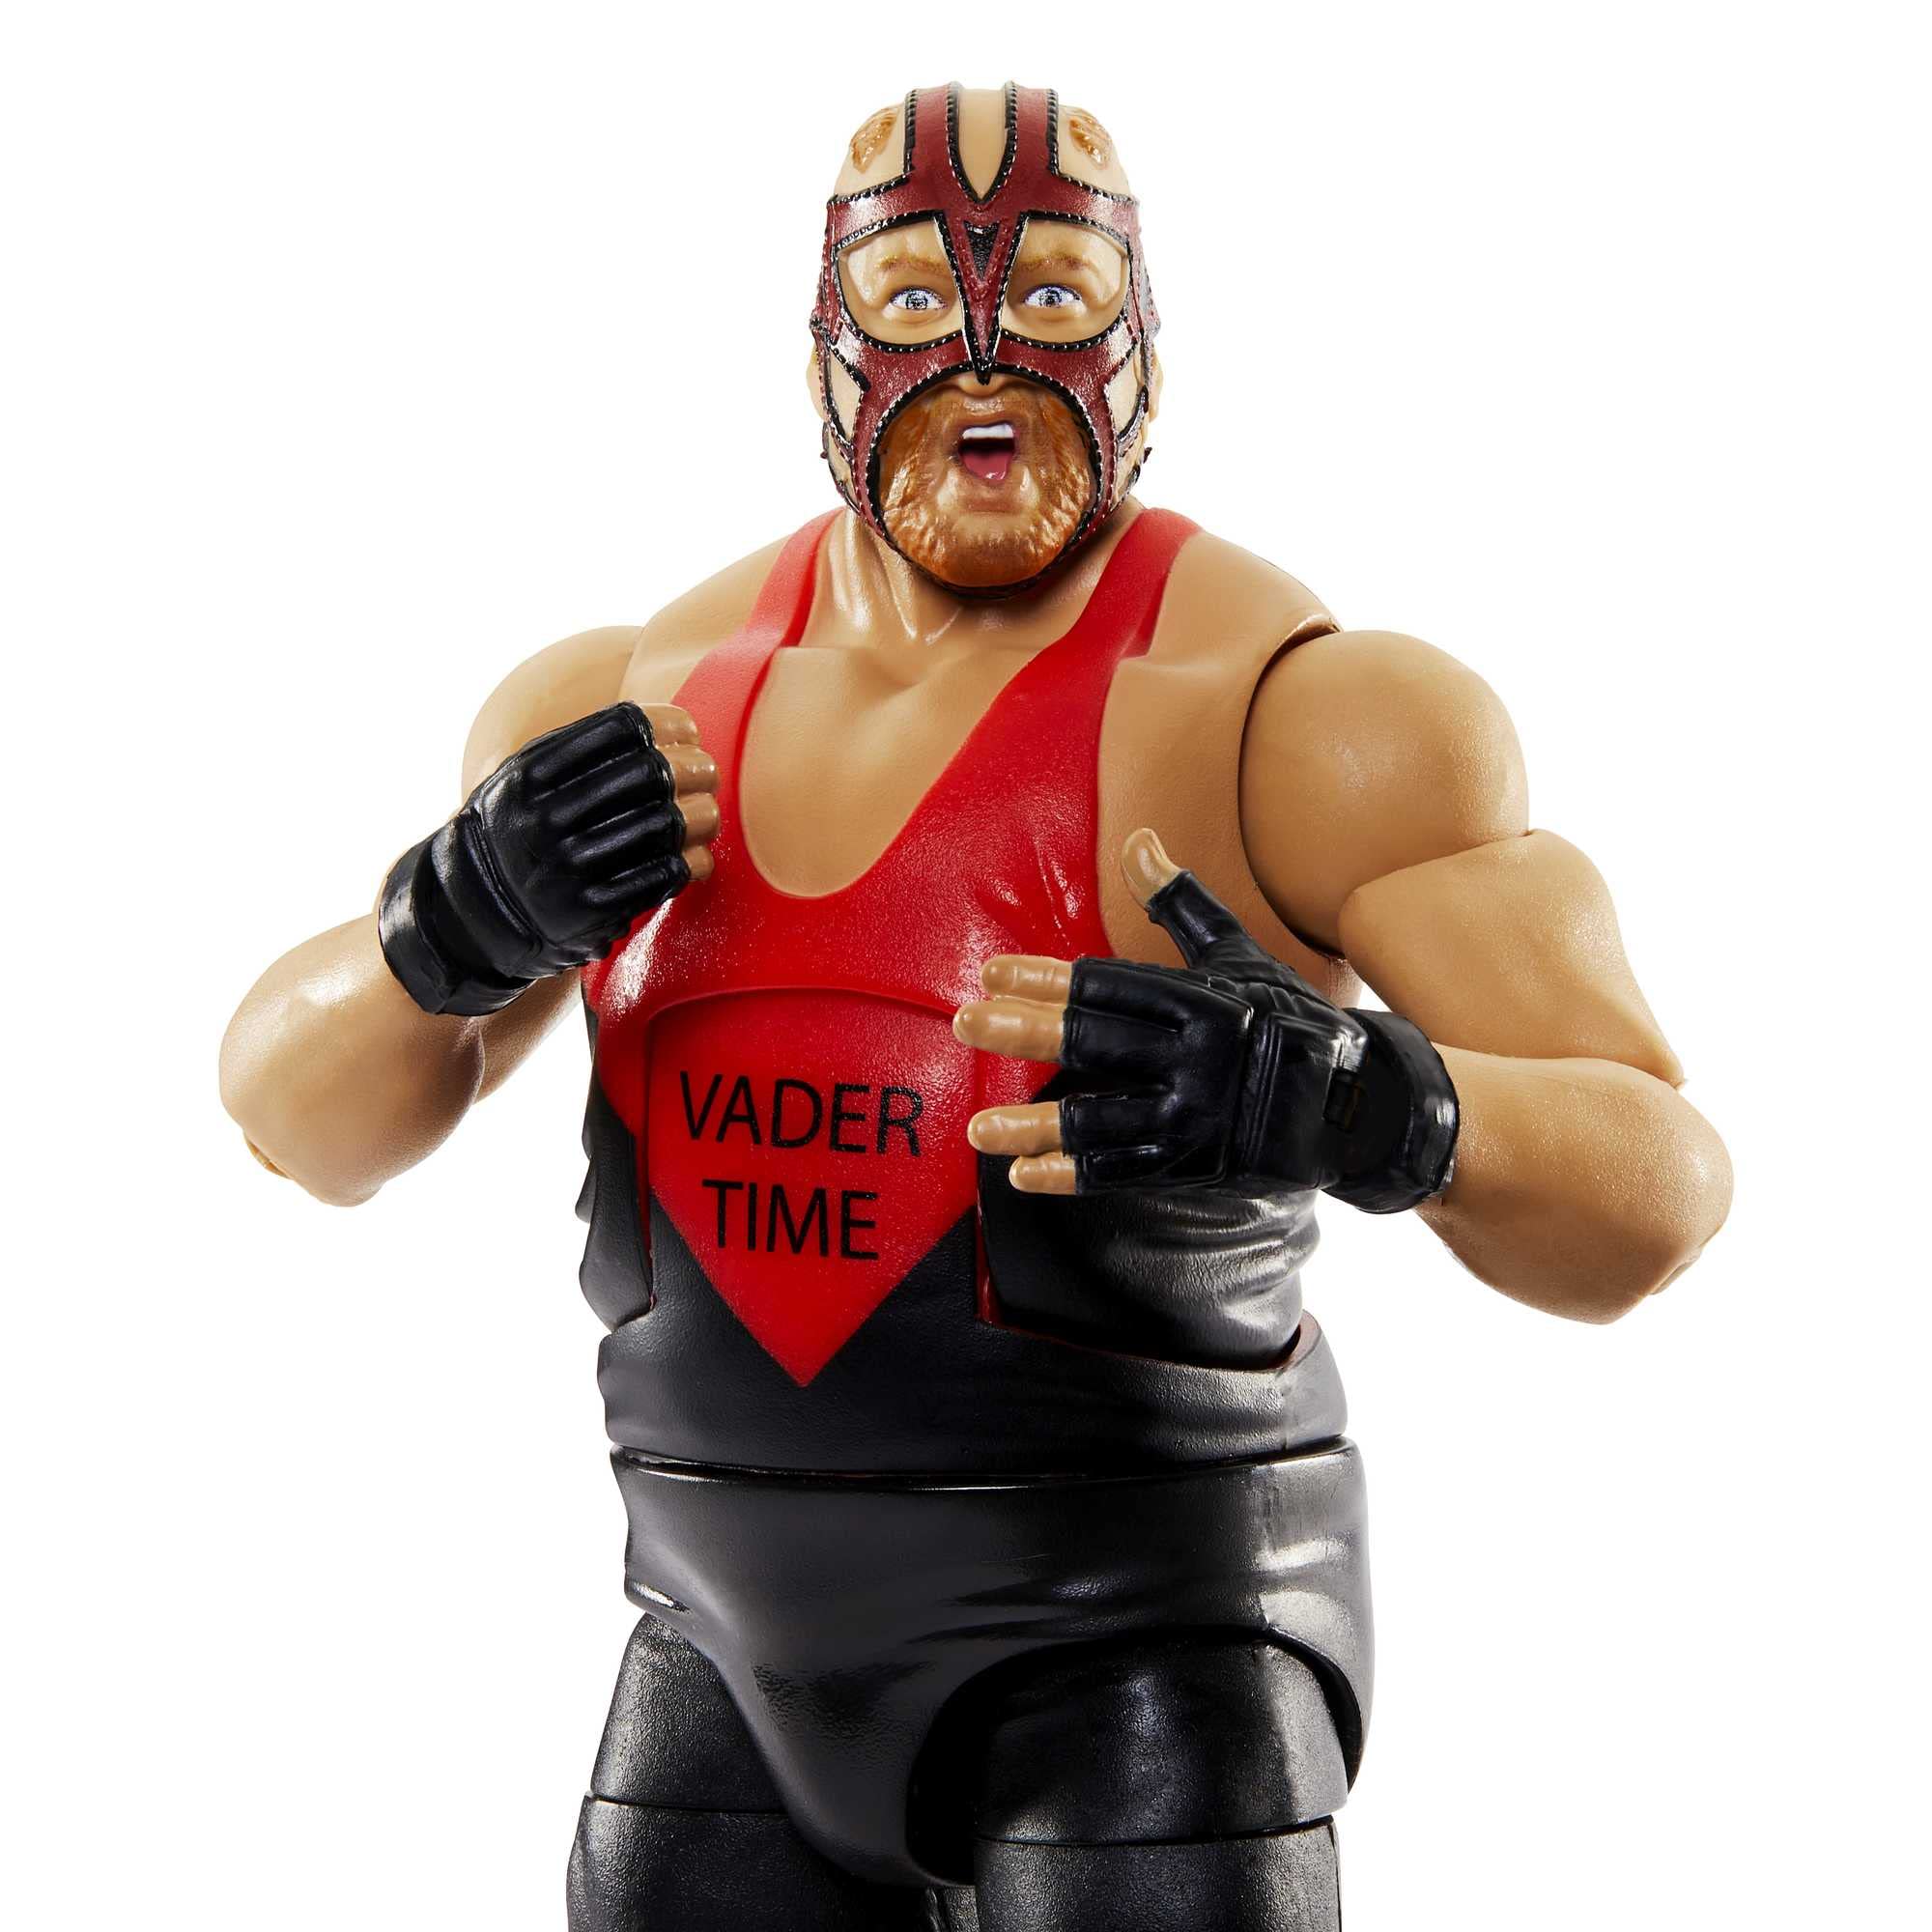 WWE Elite Action Figure Royal Rumble Vader with Accessory and Dok Hendrix Build-A-Figure Parts​, HKP16